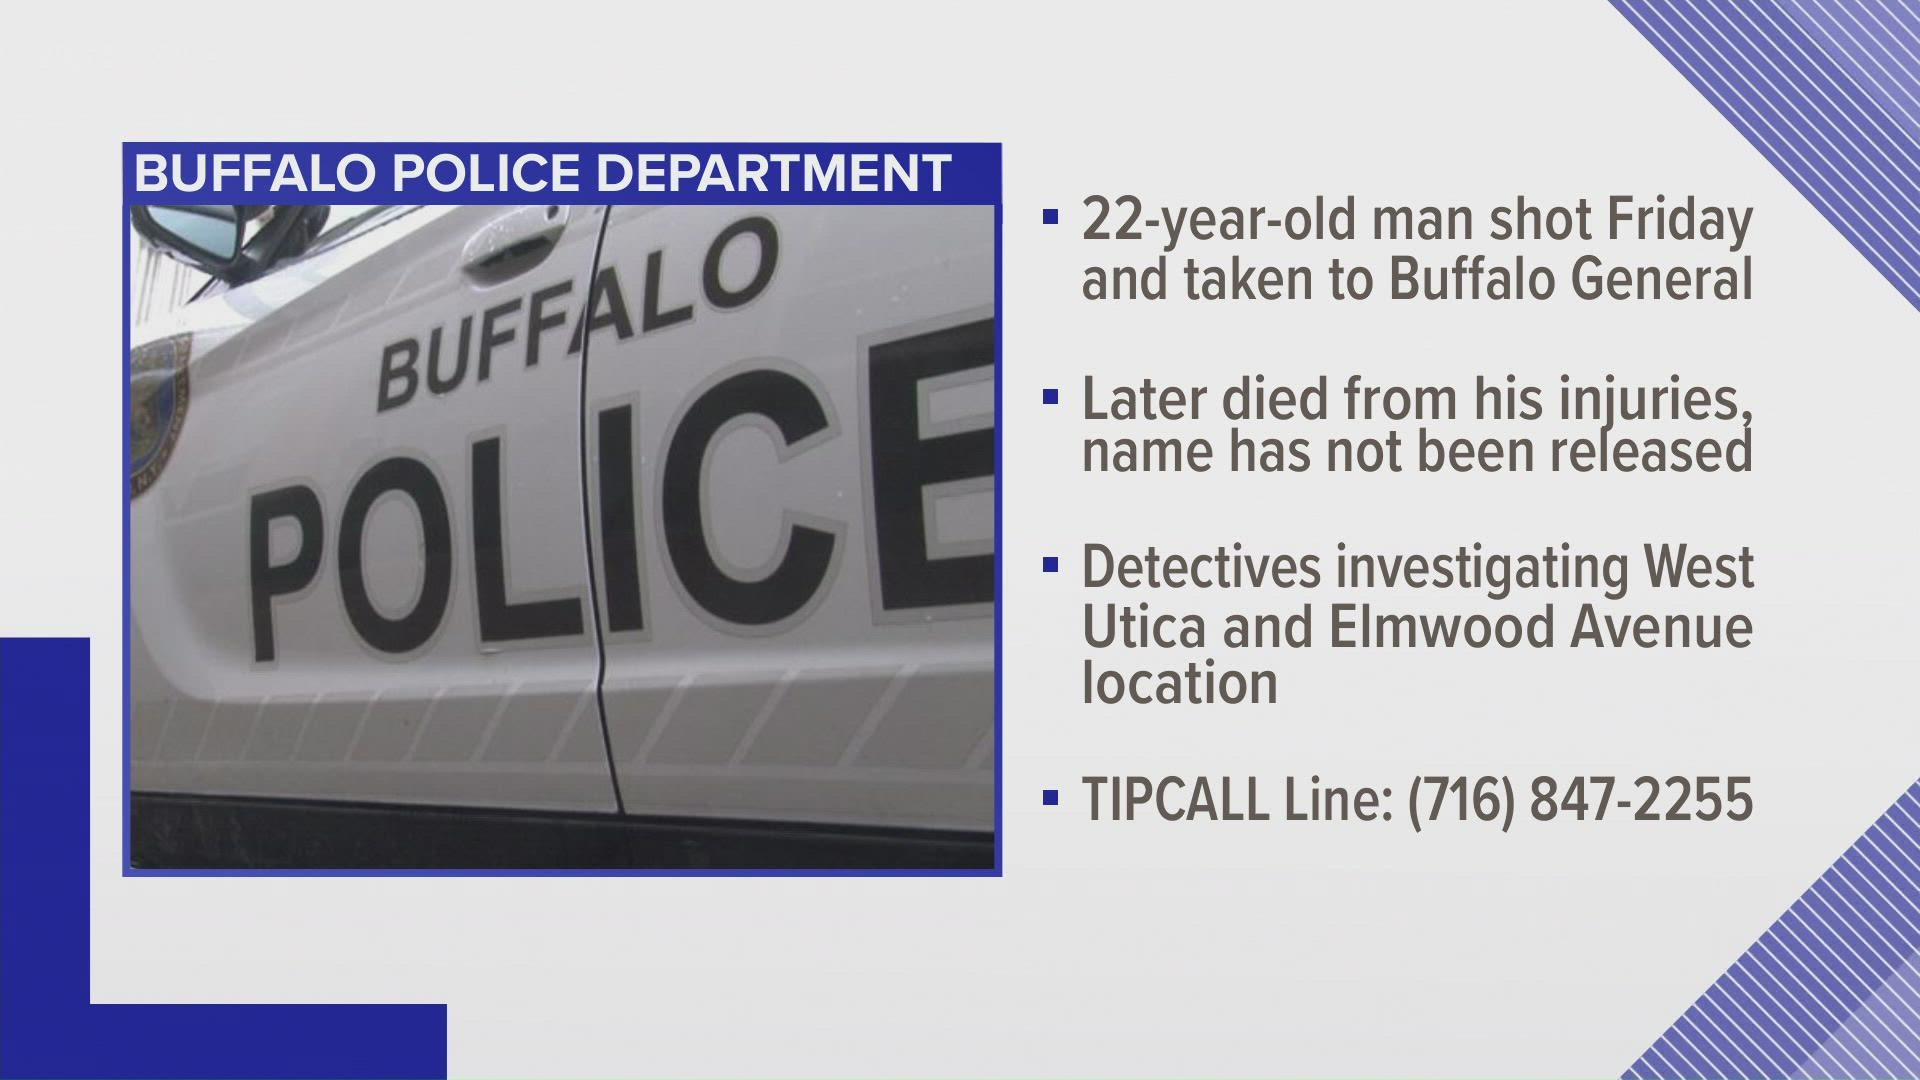 Detectives are working to see if the shooting happened near West Utica and Elmwood Avenue. Anyone with information is asked to call or text the Confidential tip line